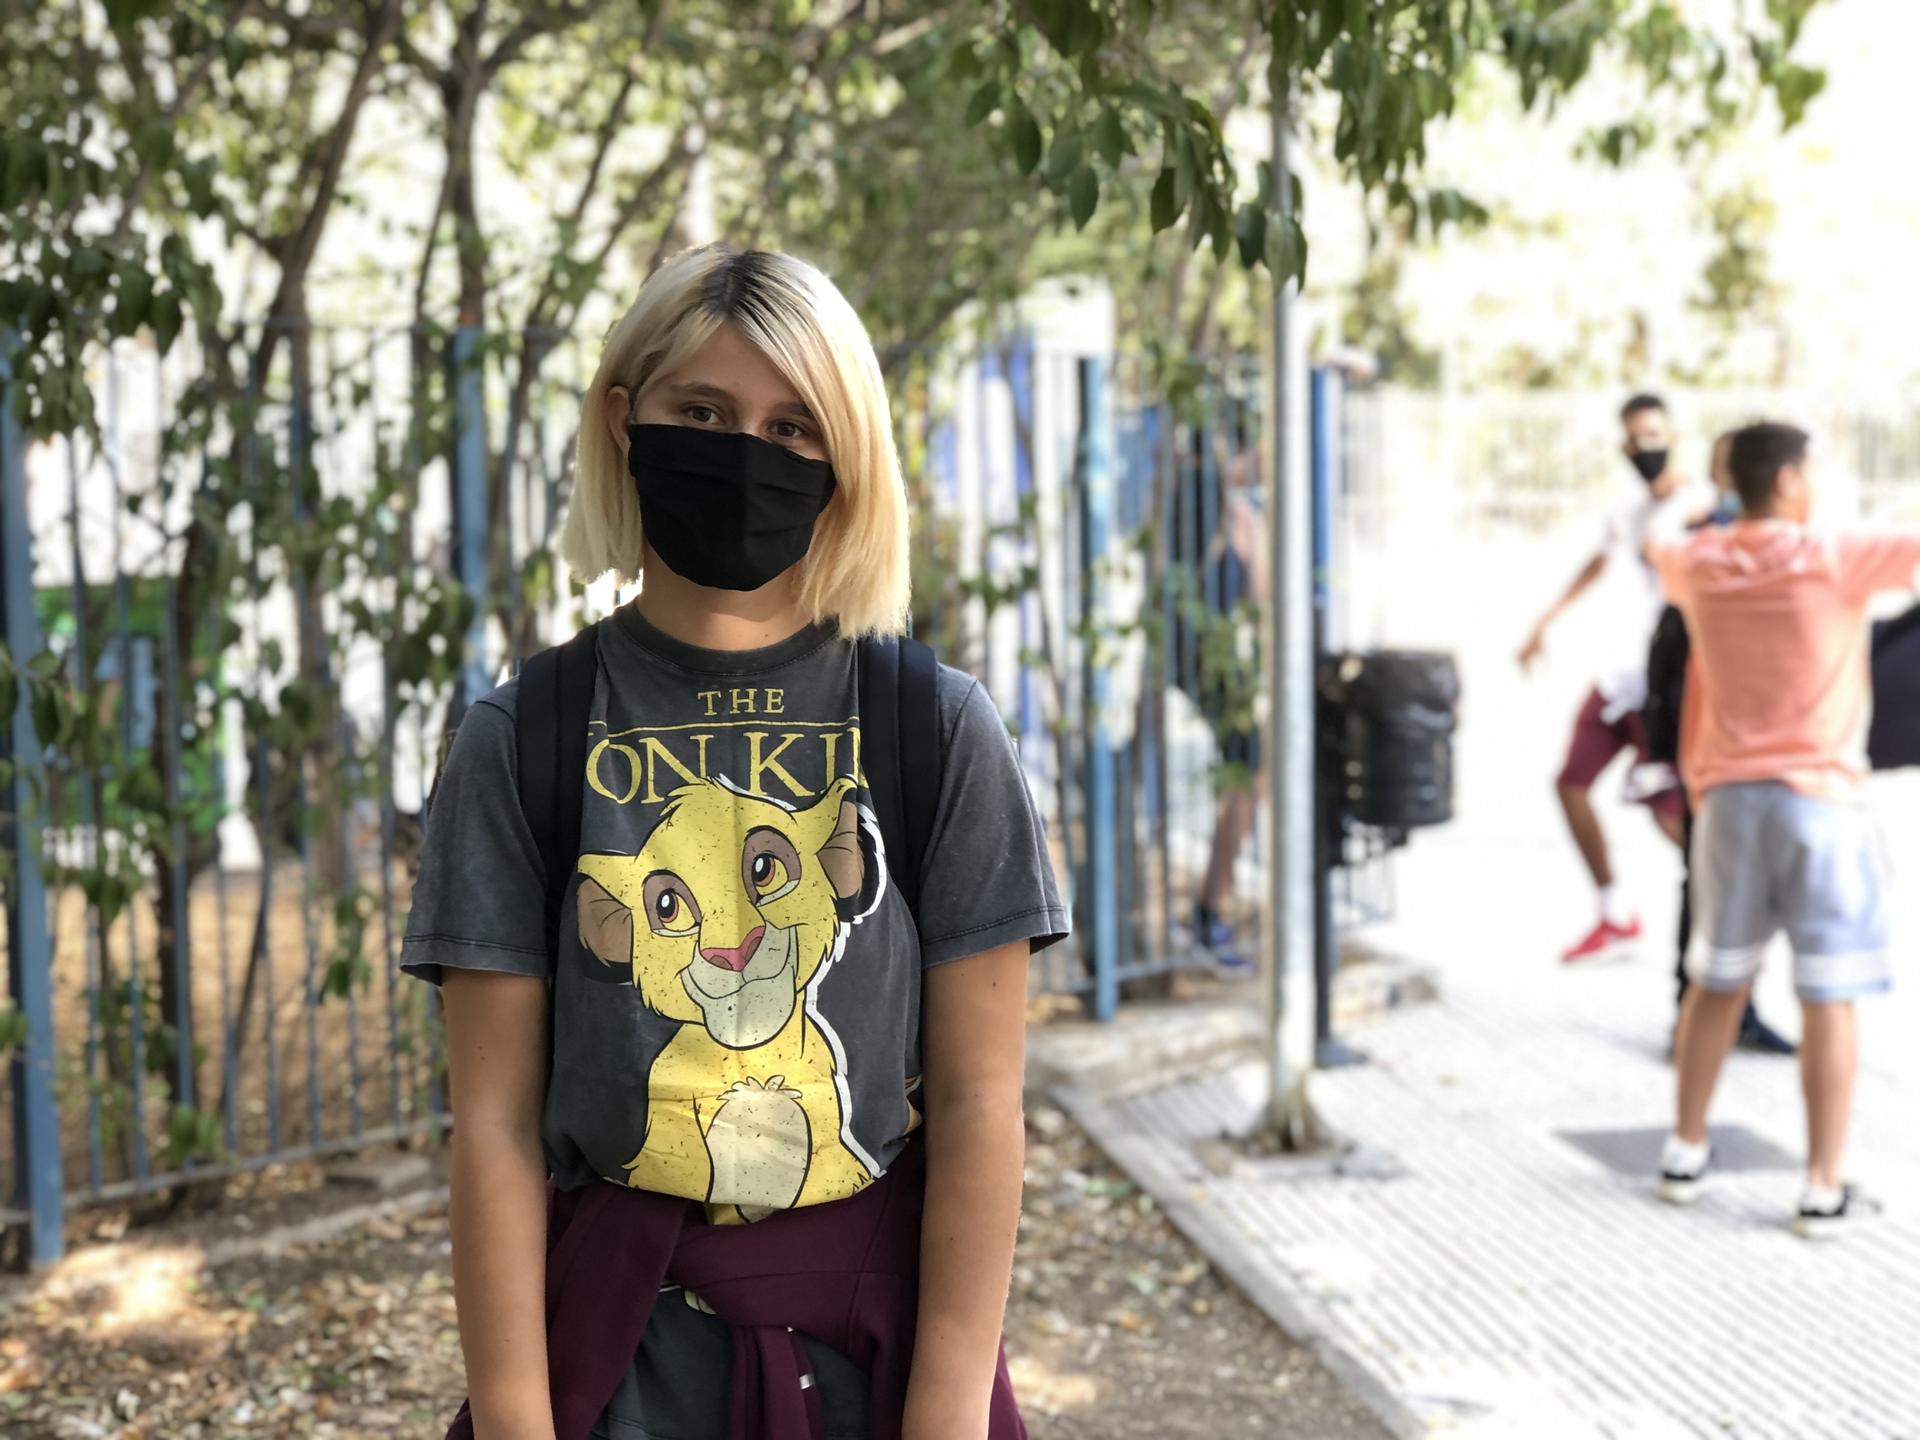 Efremia Kalogirou, a senior at the 5th Public High School of Egaleo, says she has a teacher who doesn't believe in wearing masks and won't do so in the classroom, even though he's required to. When she tried to talk to him about it, he dismissed her.